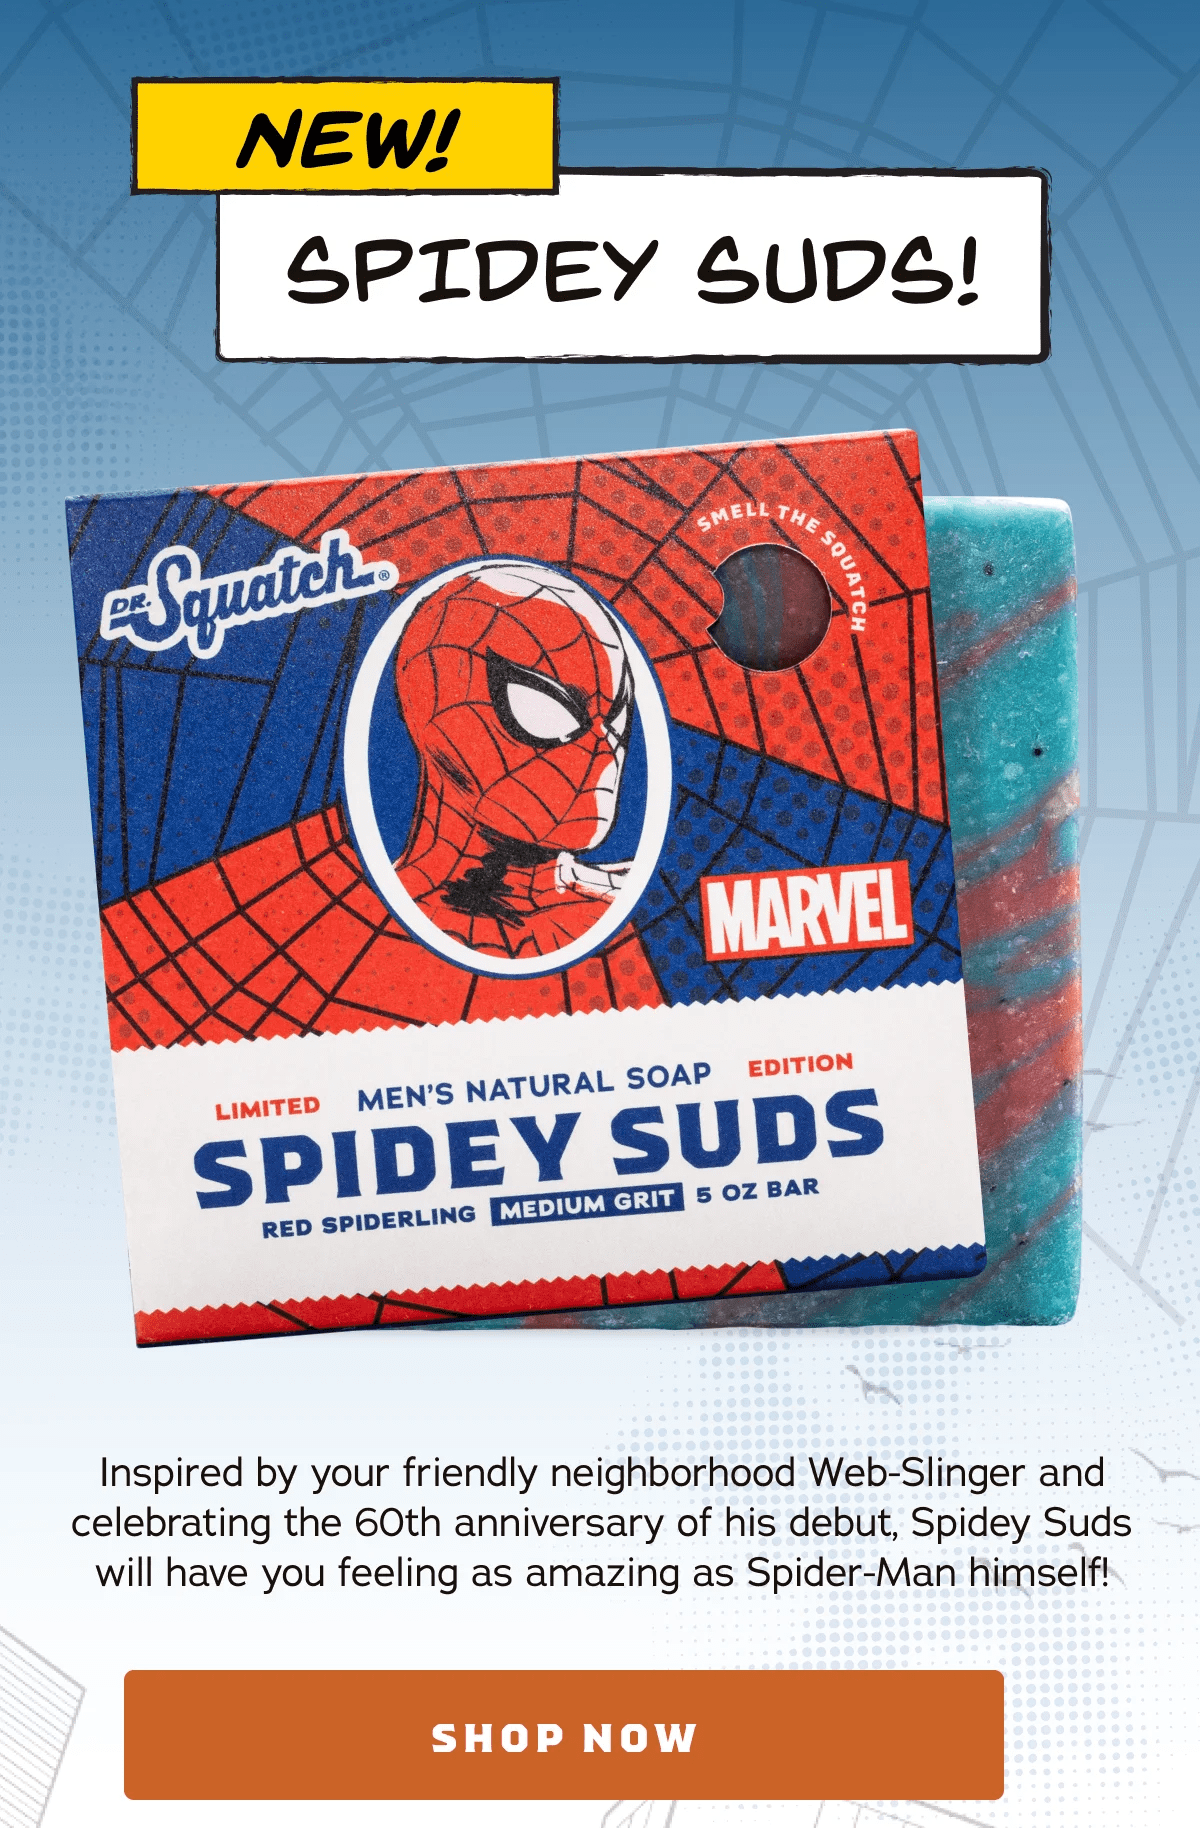 Dr. Squatch's NEW Spidey Suds Review 